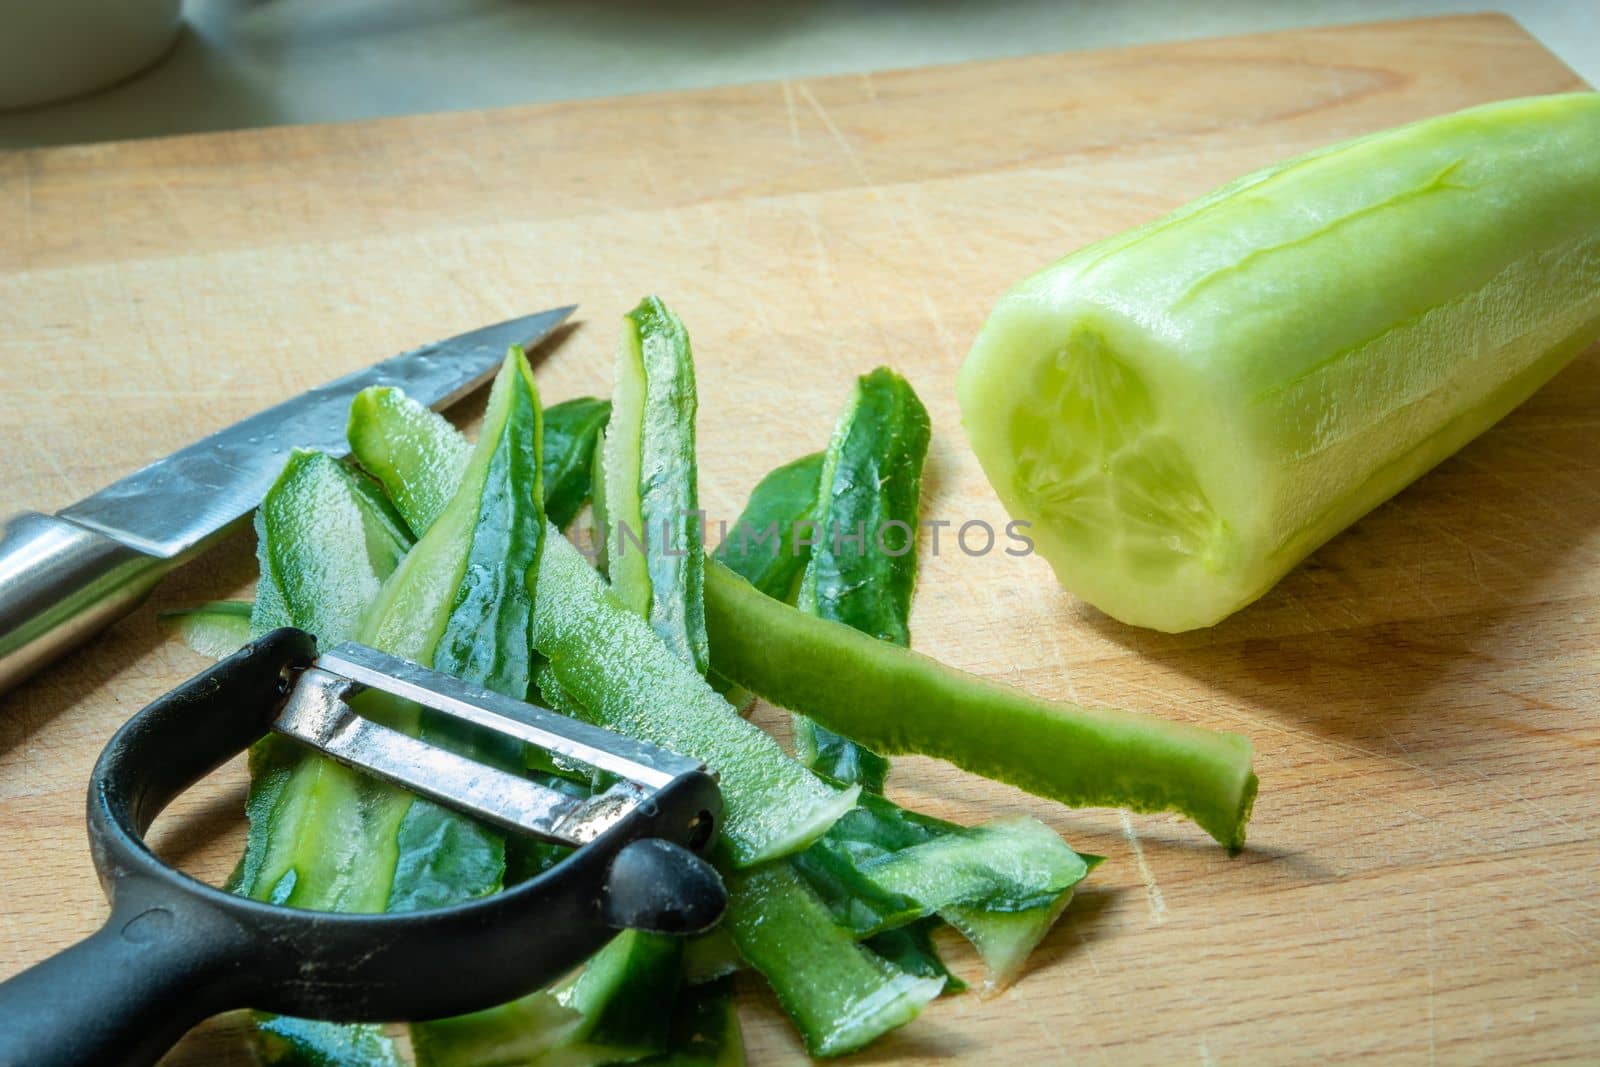 Vegetable peeler and knife lying next to peeled green cucumber